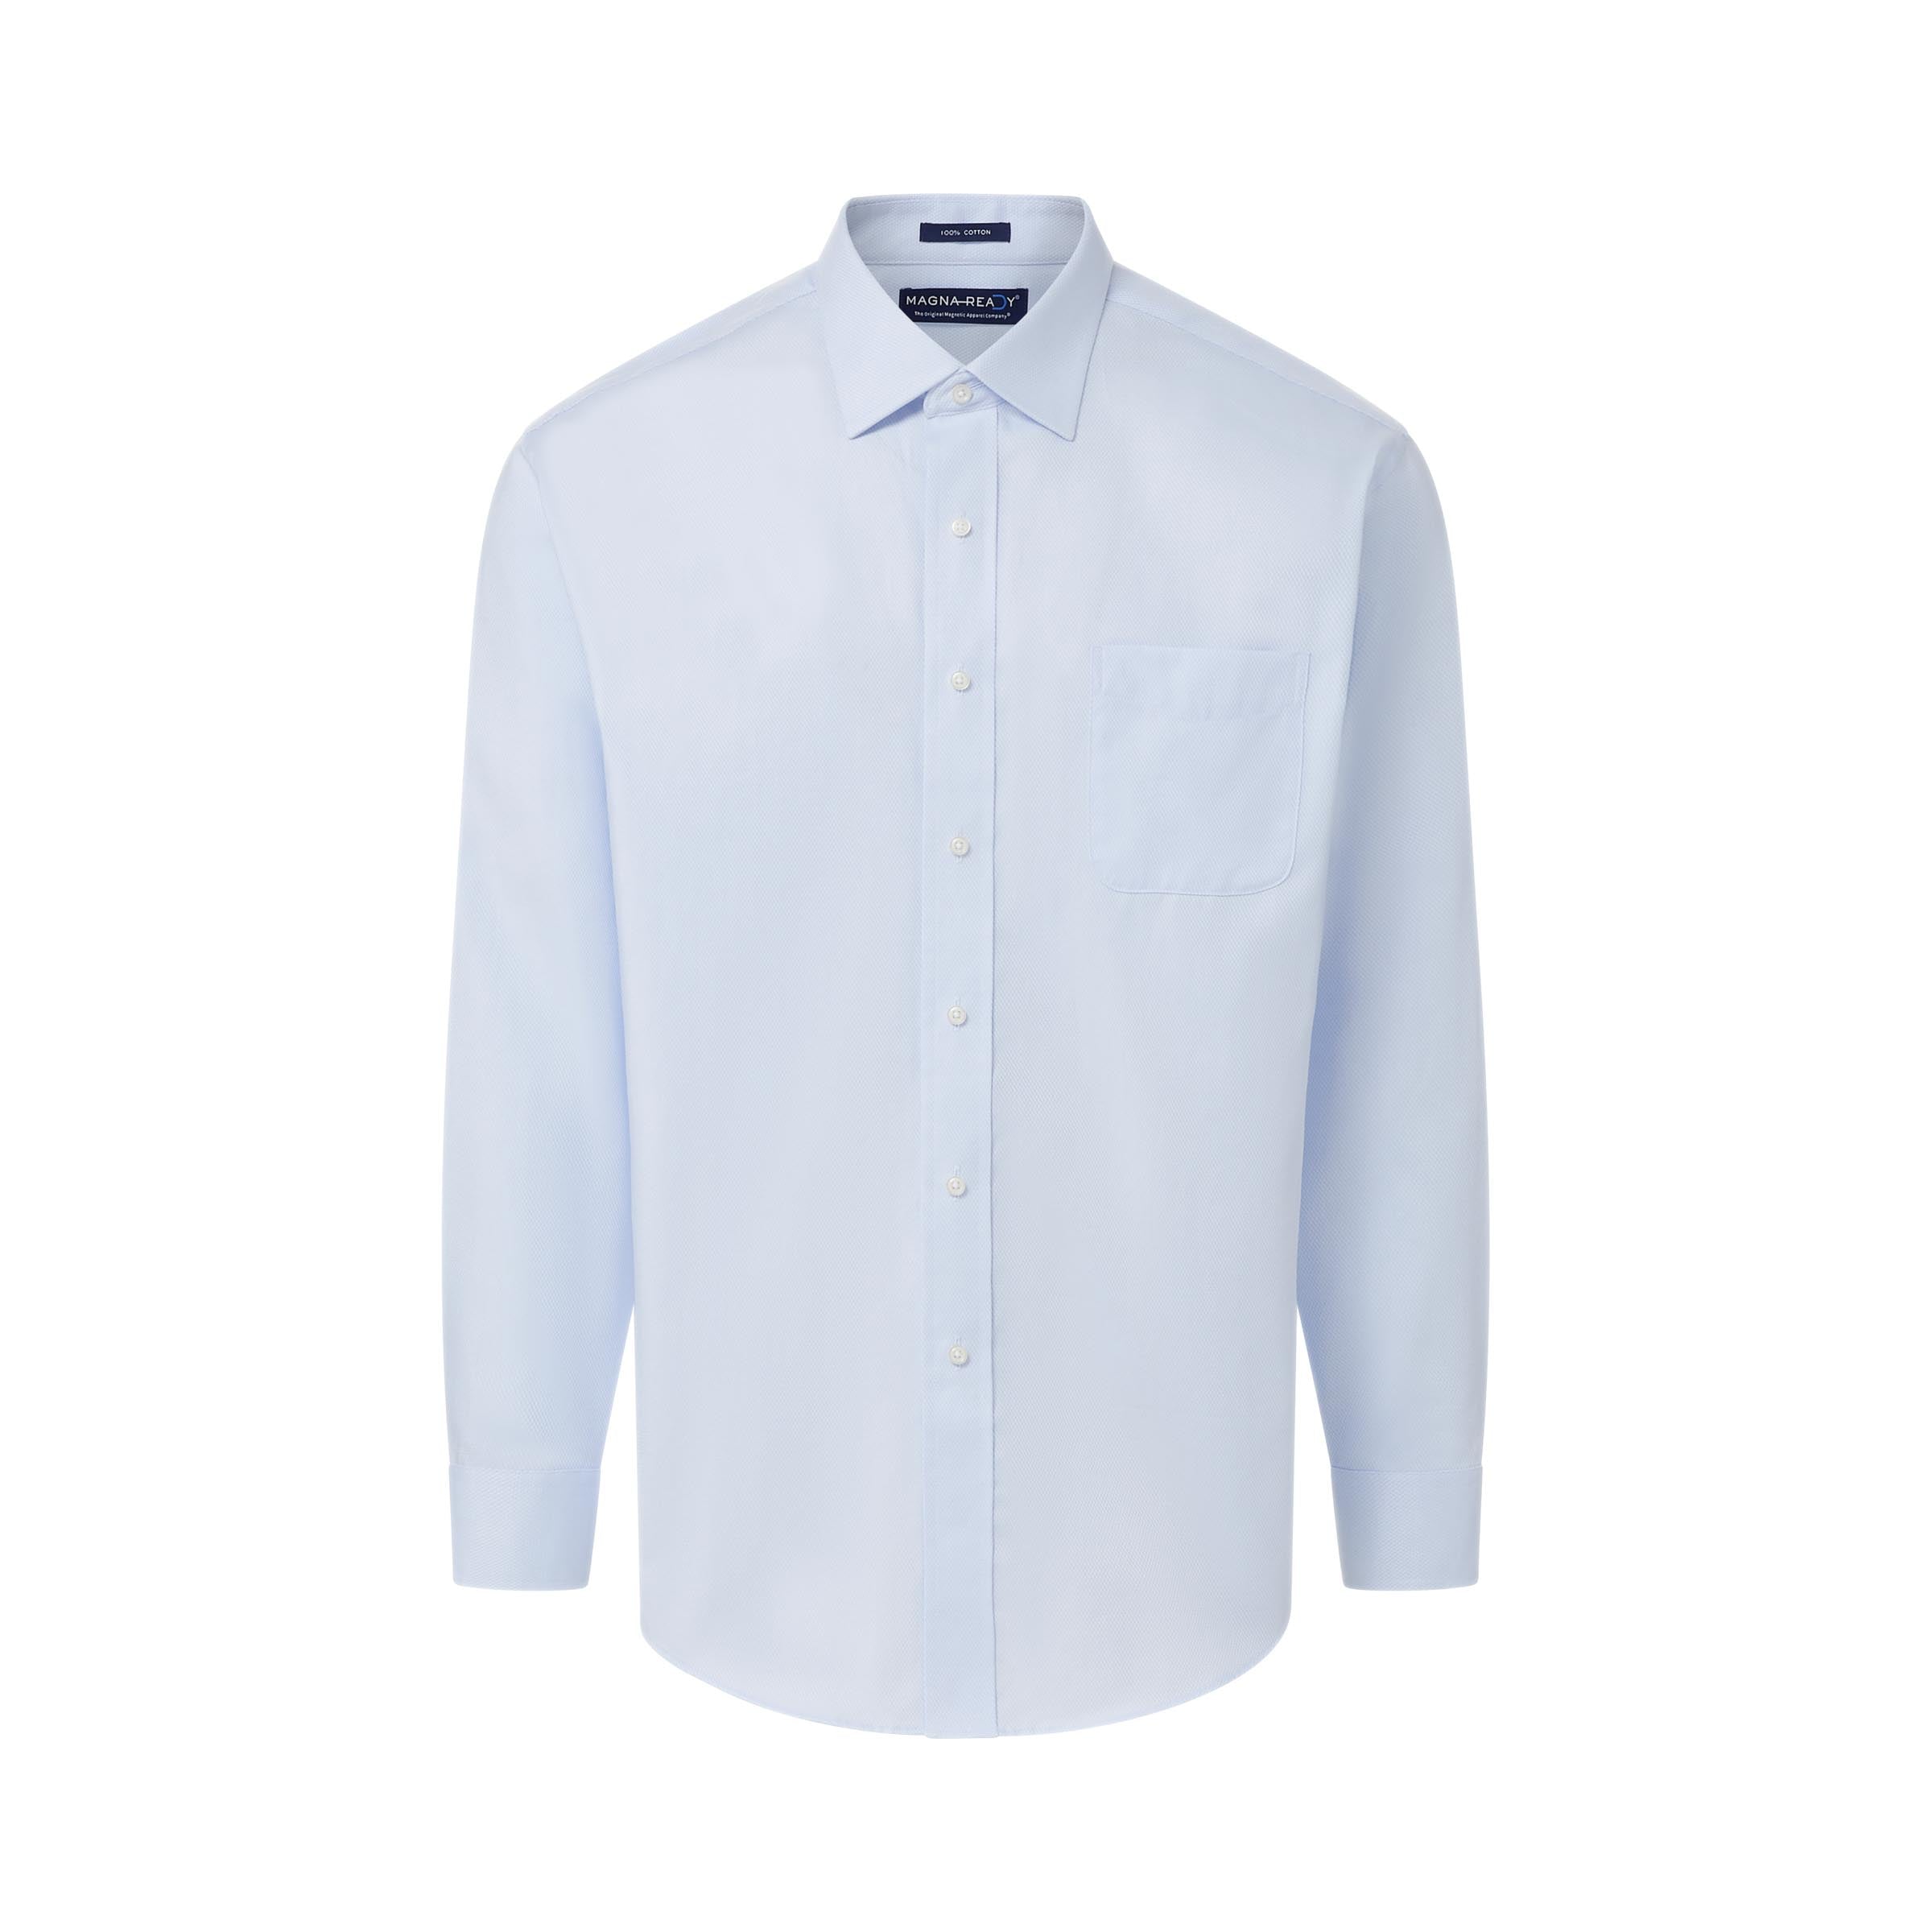 Classic Long Sleeve Light Blue ‘Ryan’ Dress Shirt with Magnetic Closures